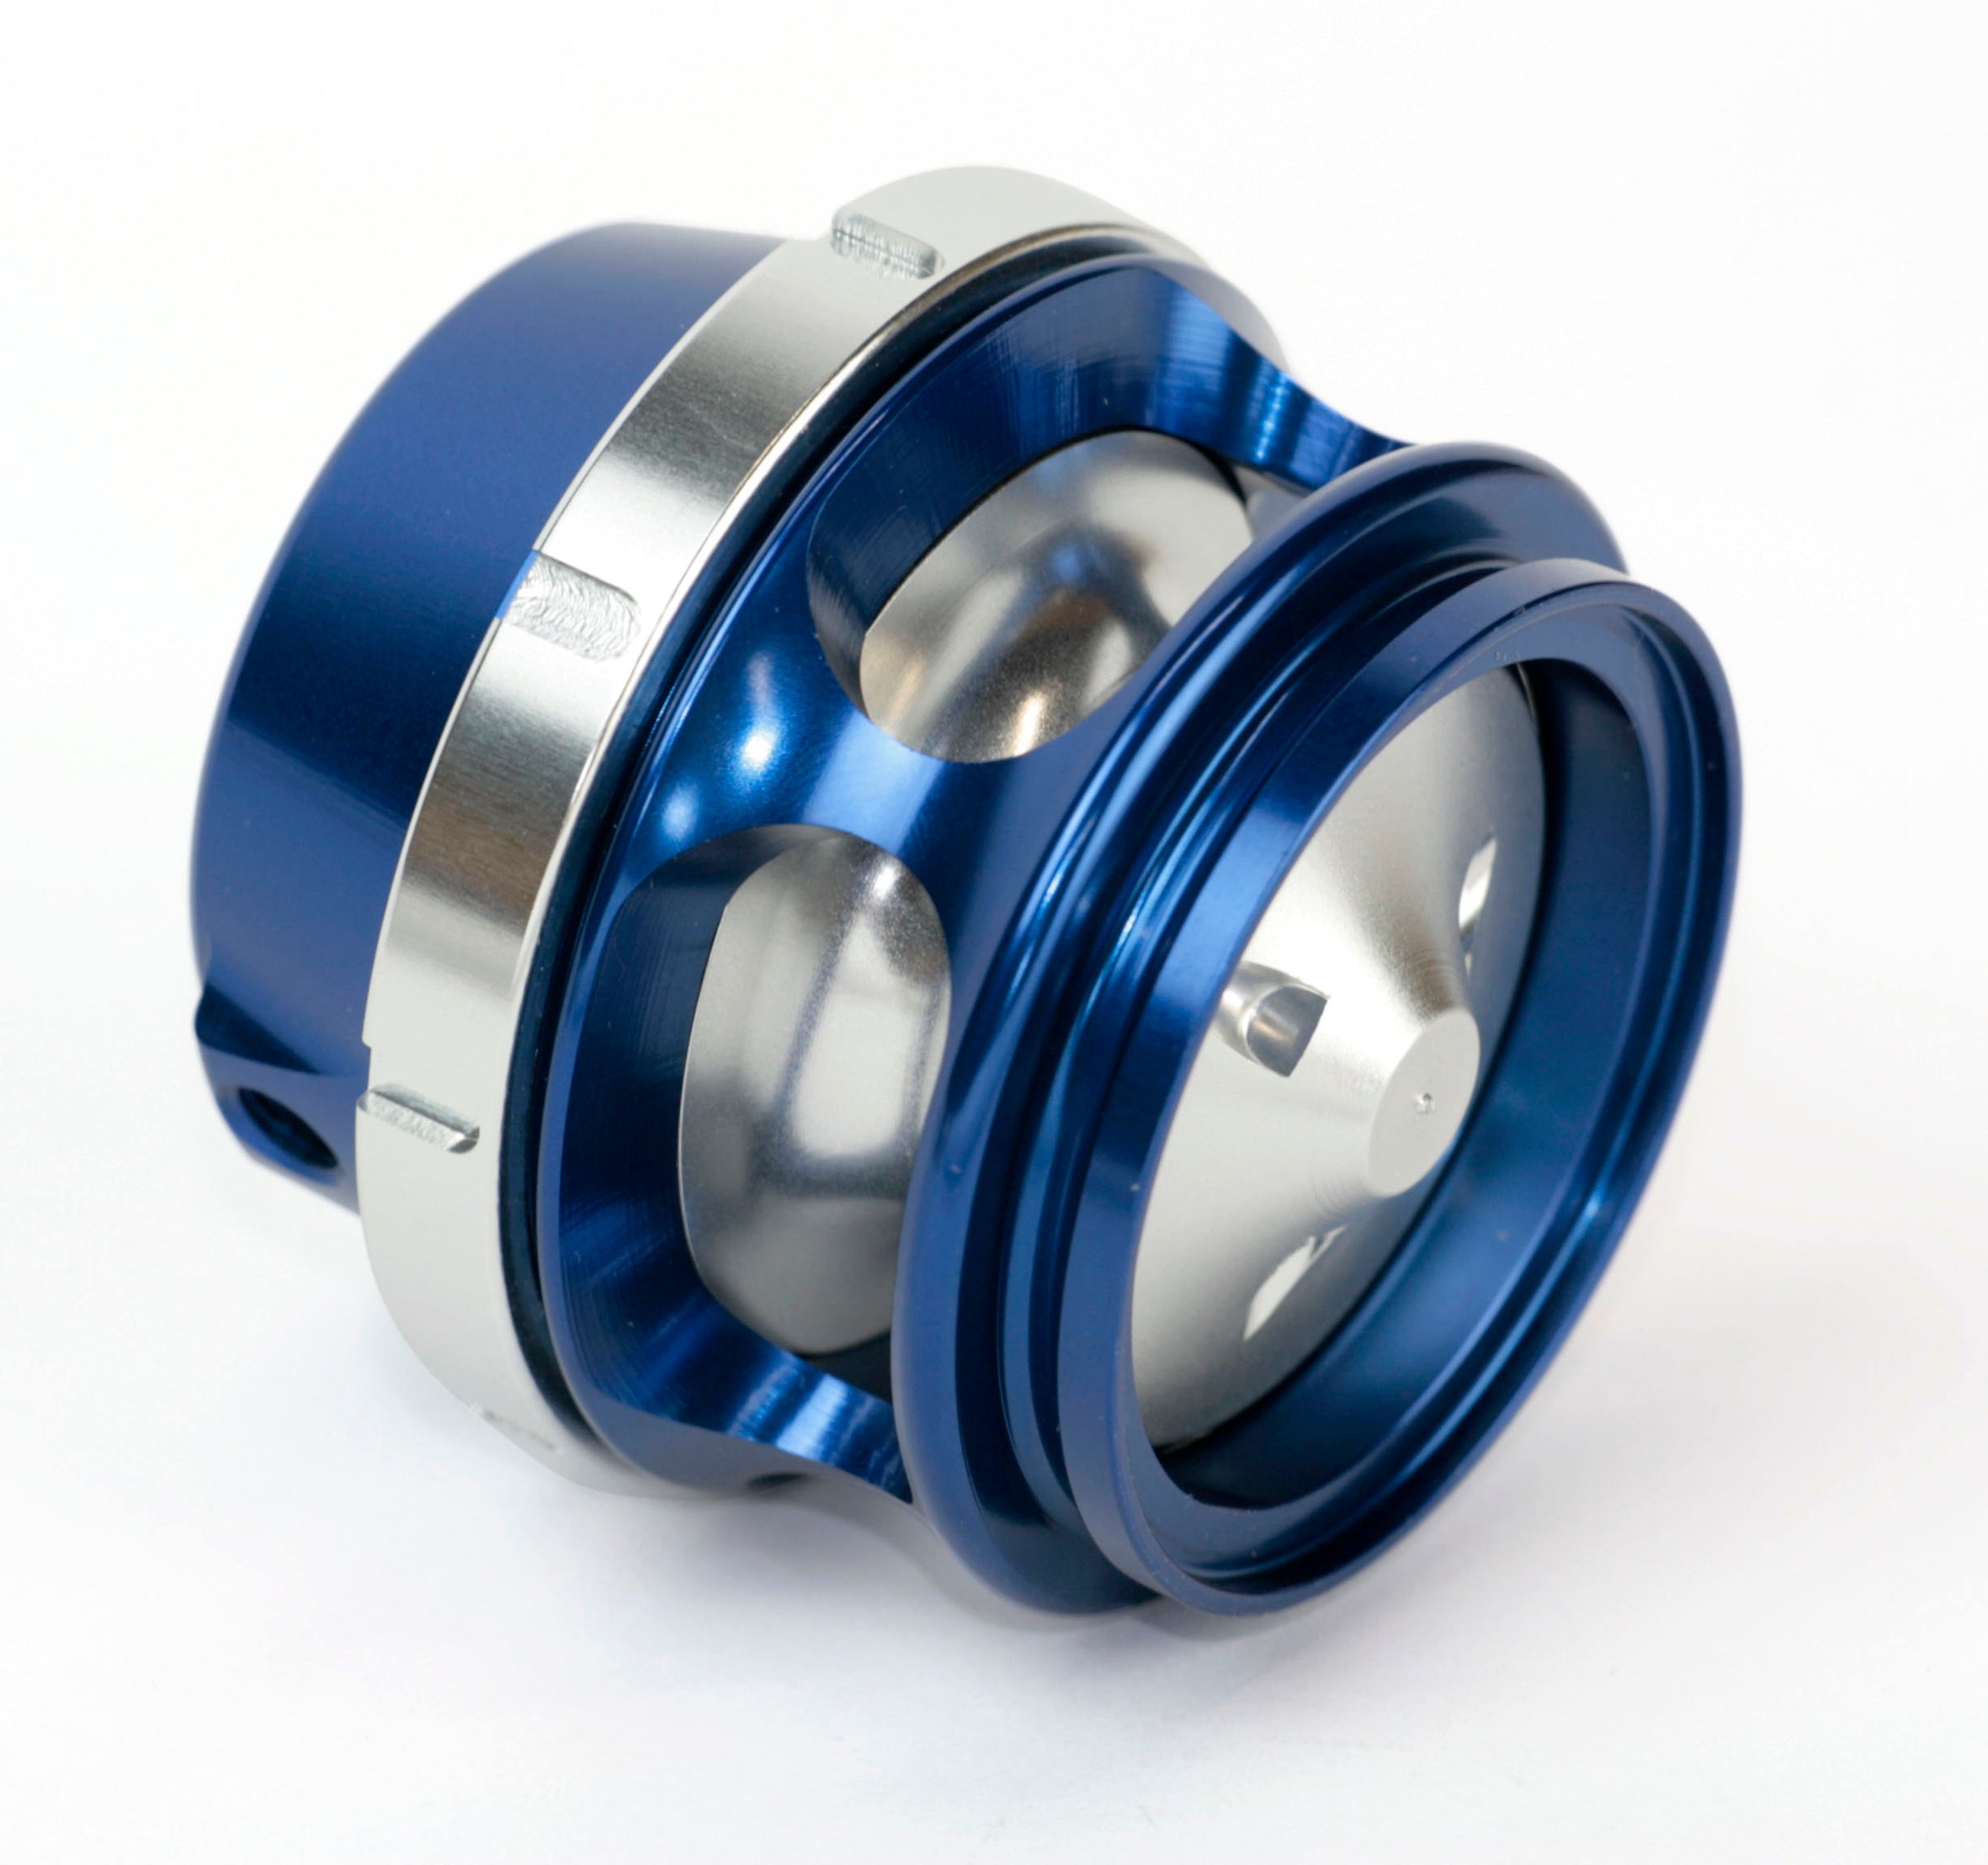 Raceport Universal - BLUE (NO weld flange)
Female flange (fits TiAl style flanges)